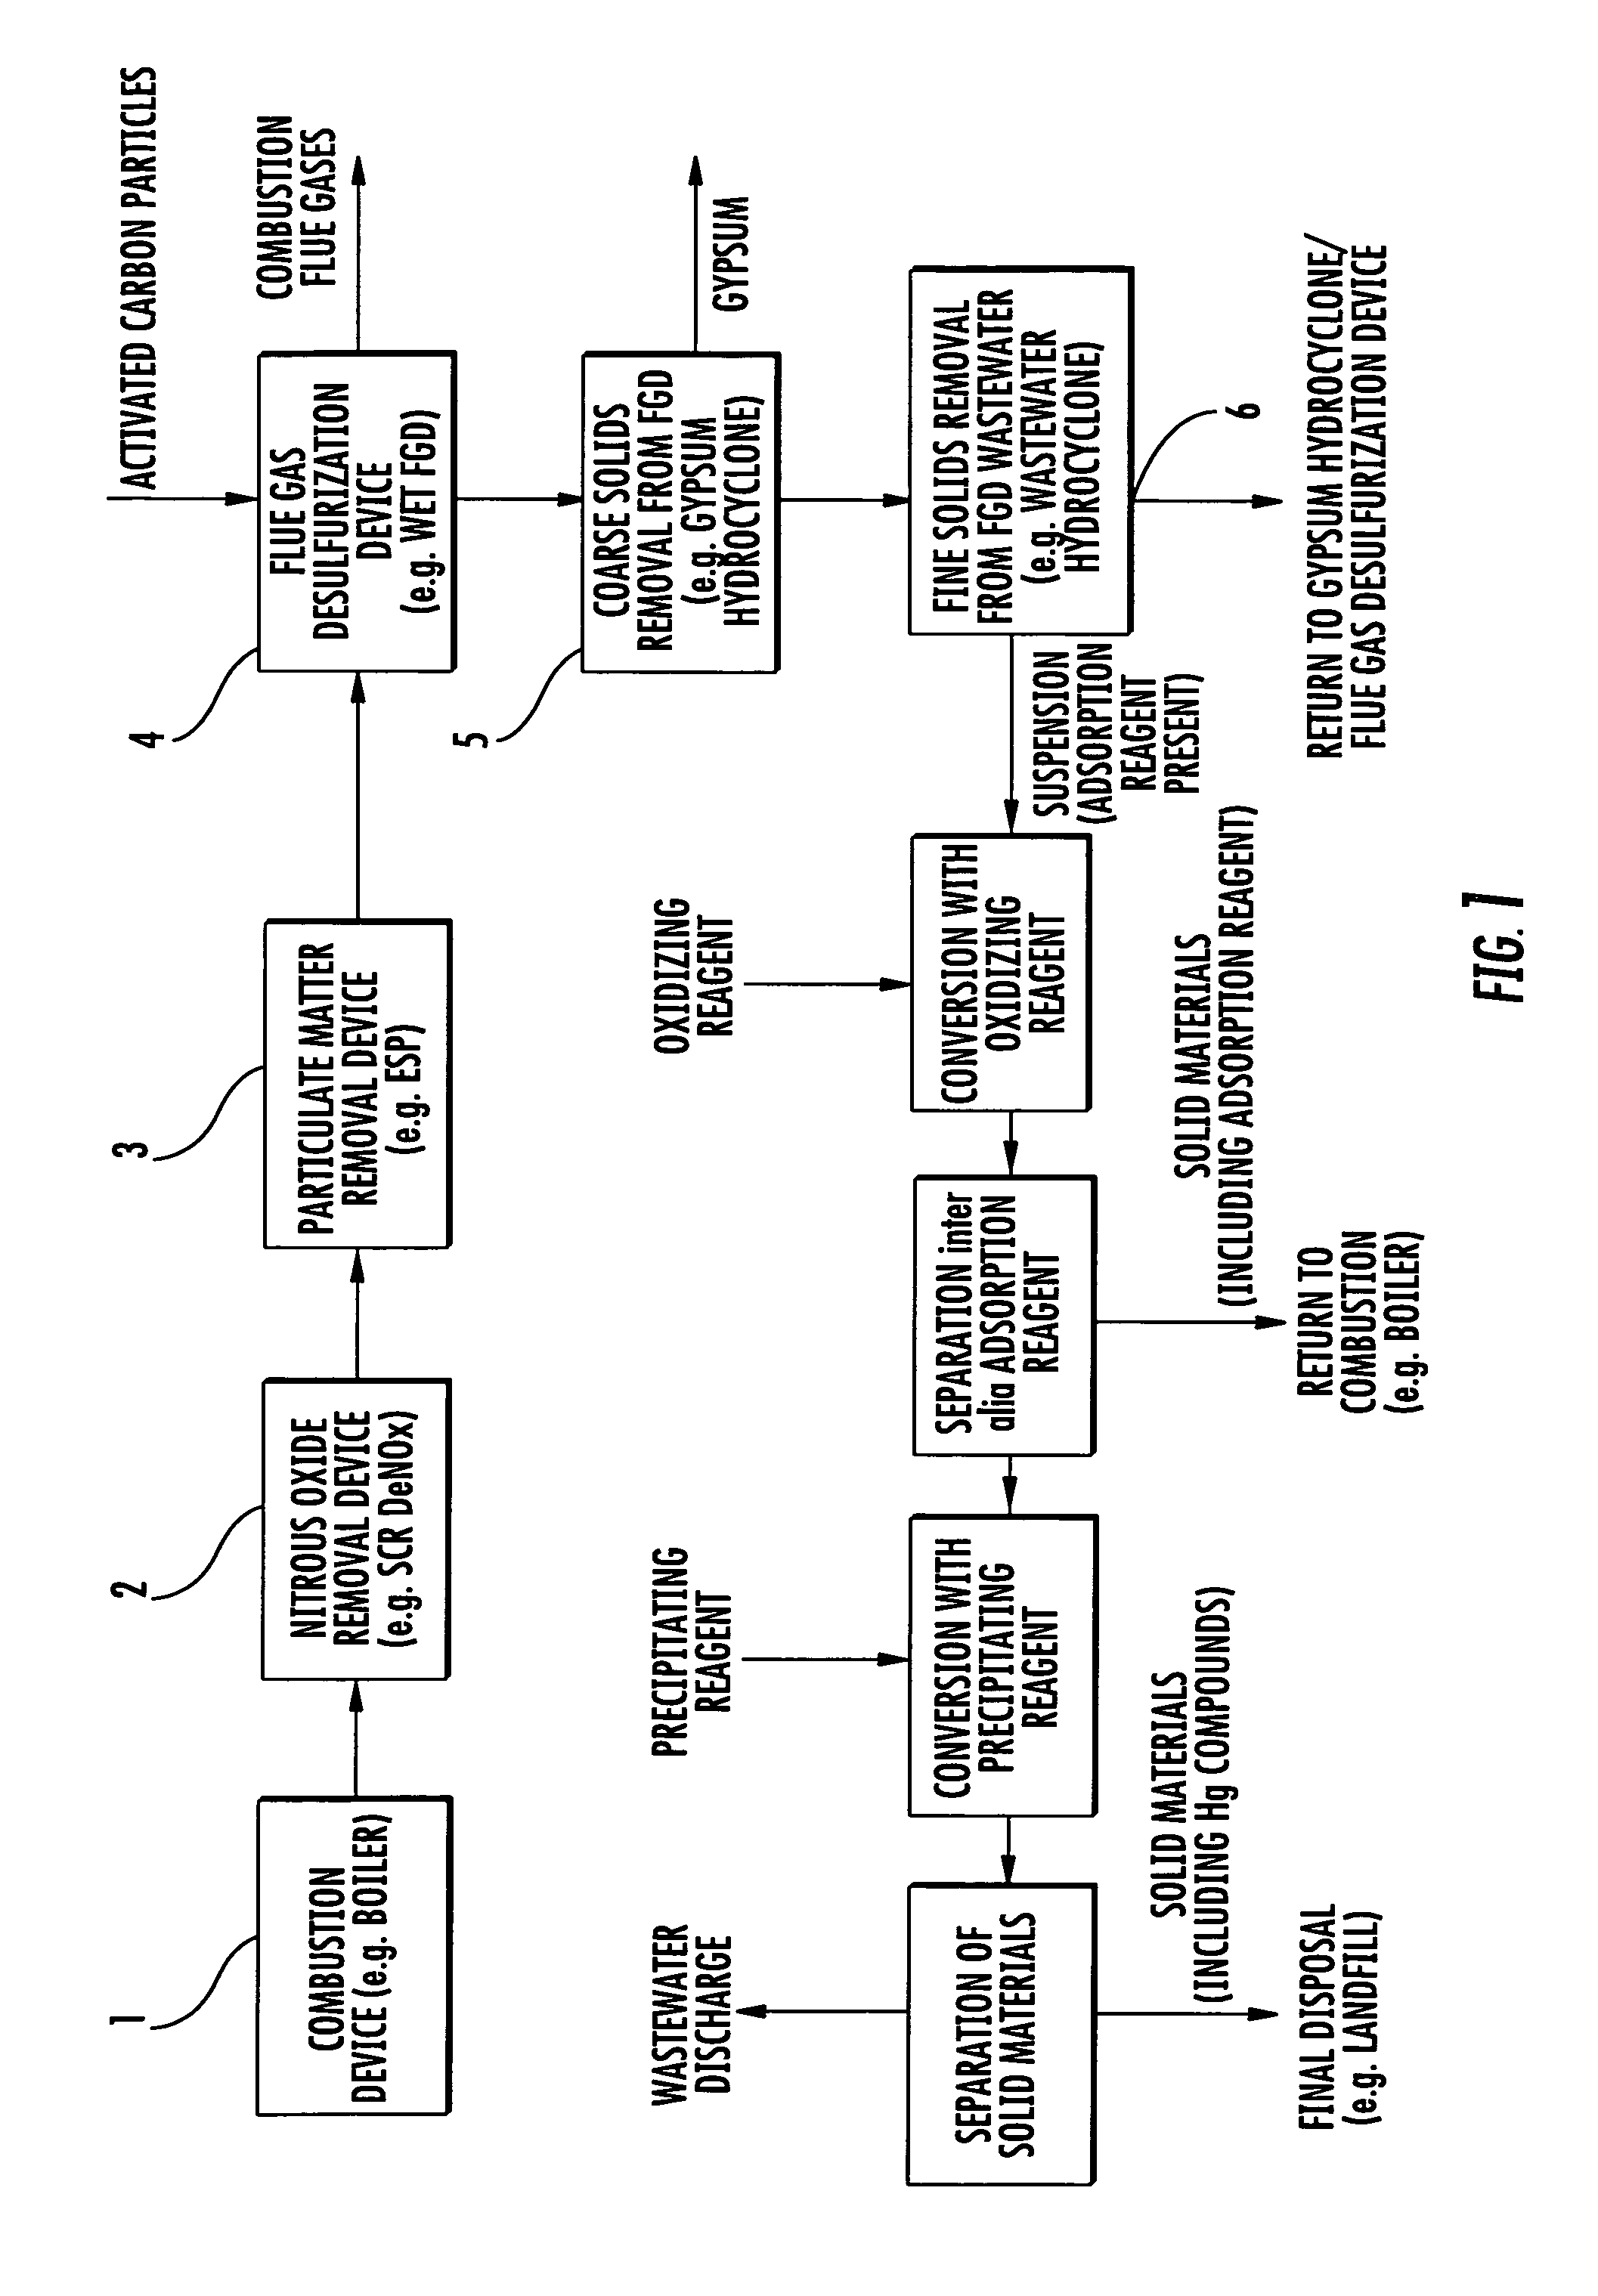 Method for removing mercury from flue gas after combustion